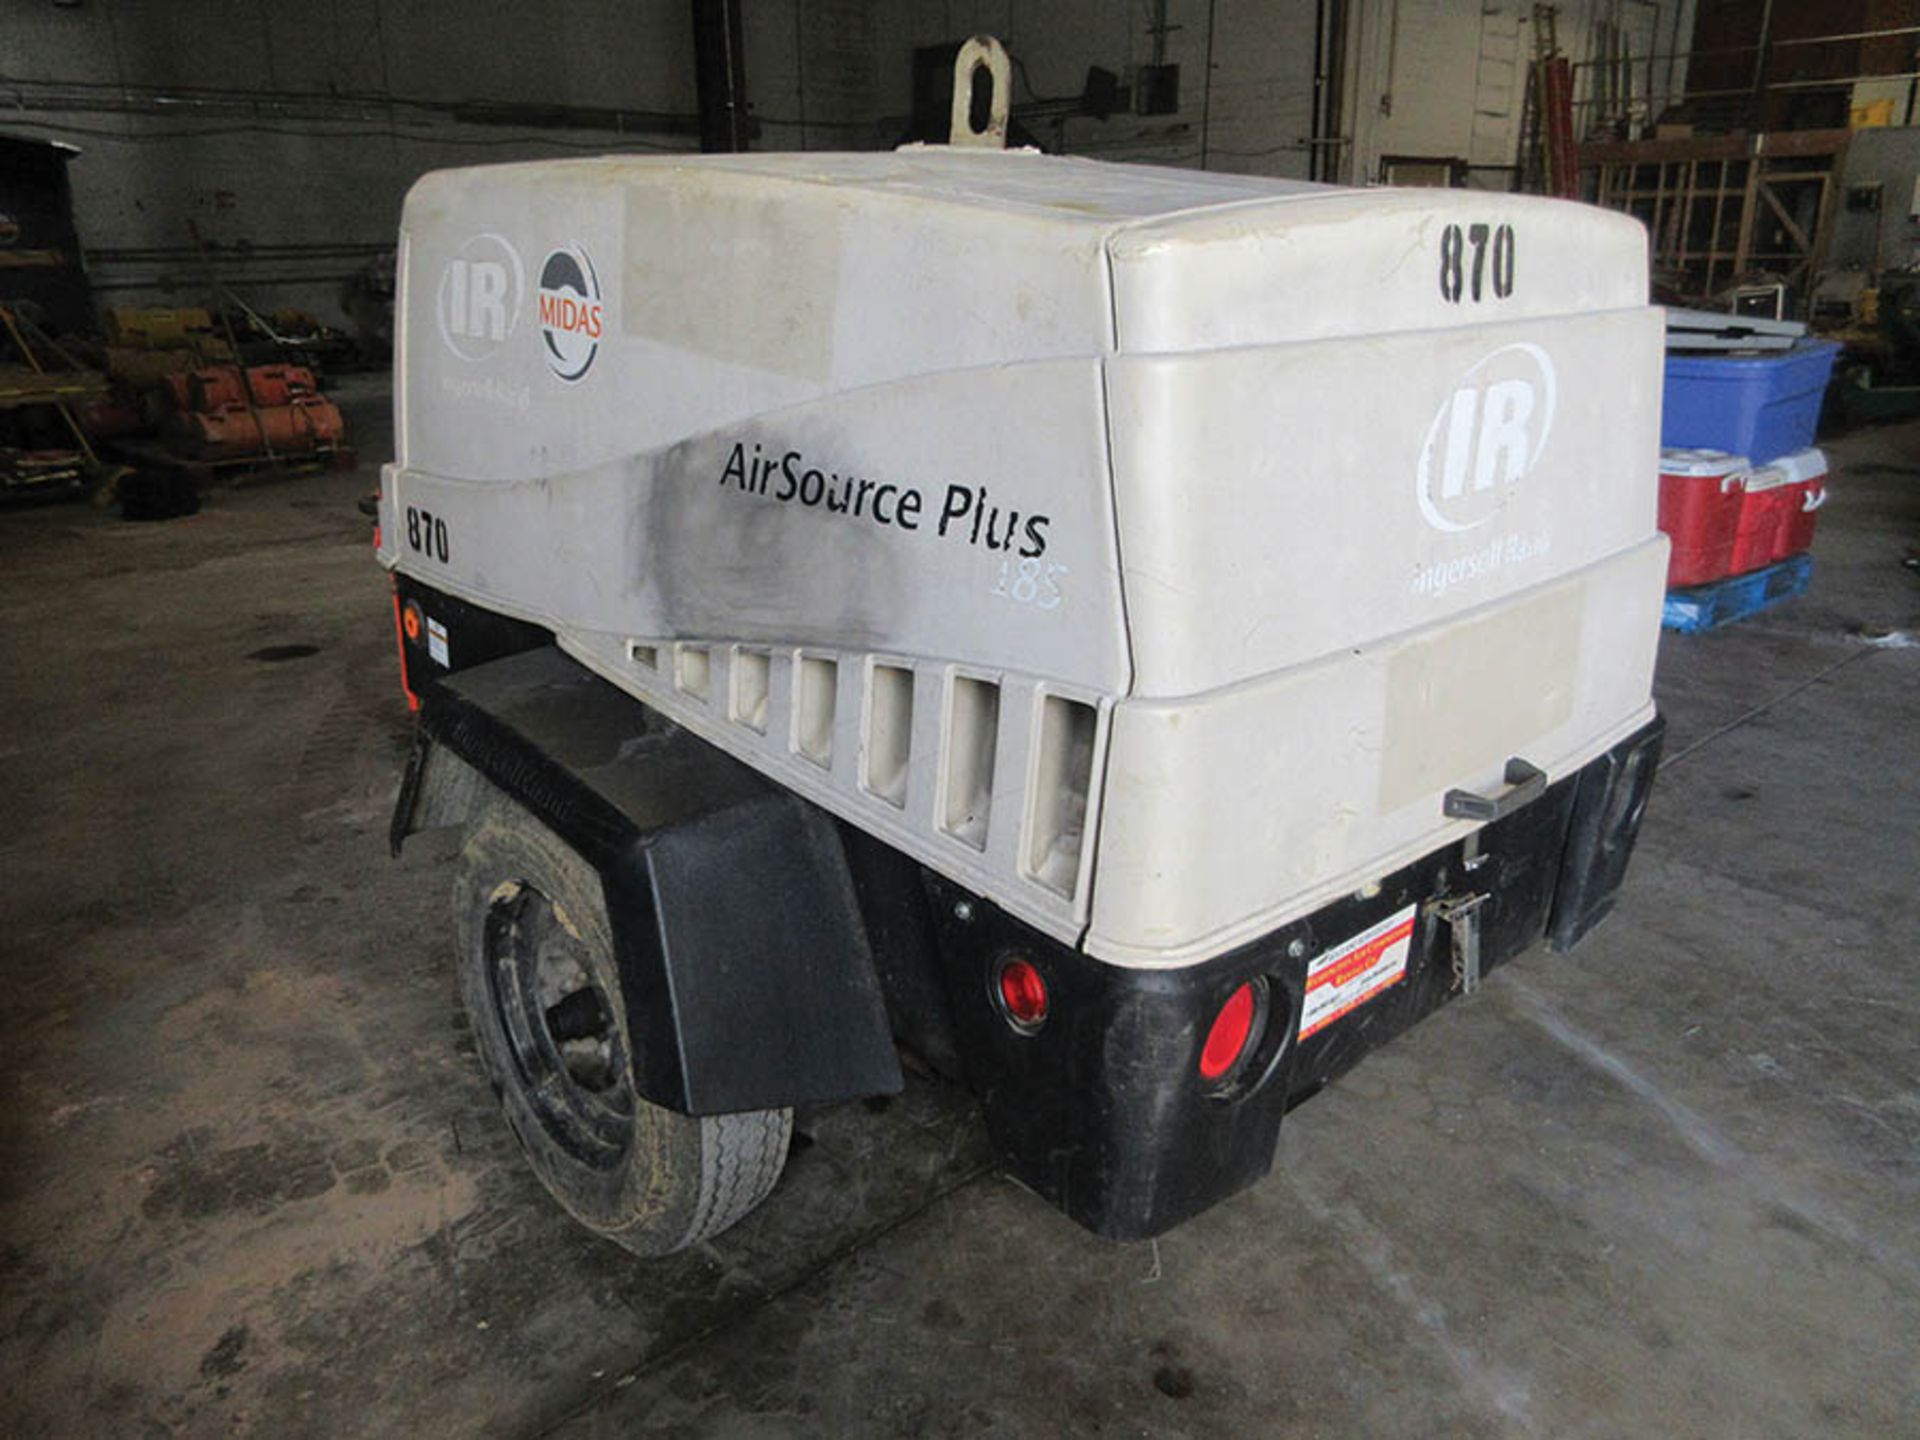 INGERSOLL RAND AIR SOURCE PLUS 185 TOWABLE AIR COMPRESSOR, 1731 HOURS, S/N 397294UASB10 (2008) - Image 2 of 5